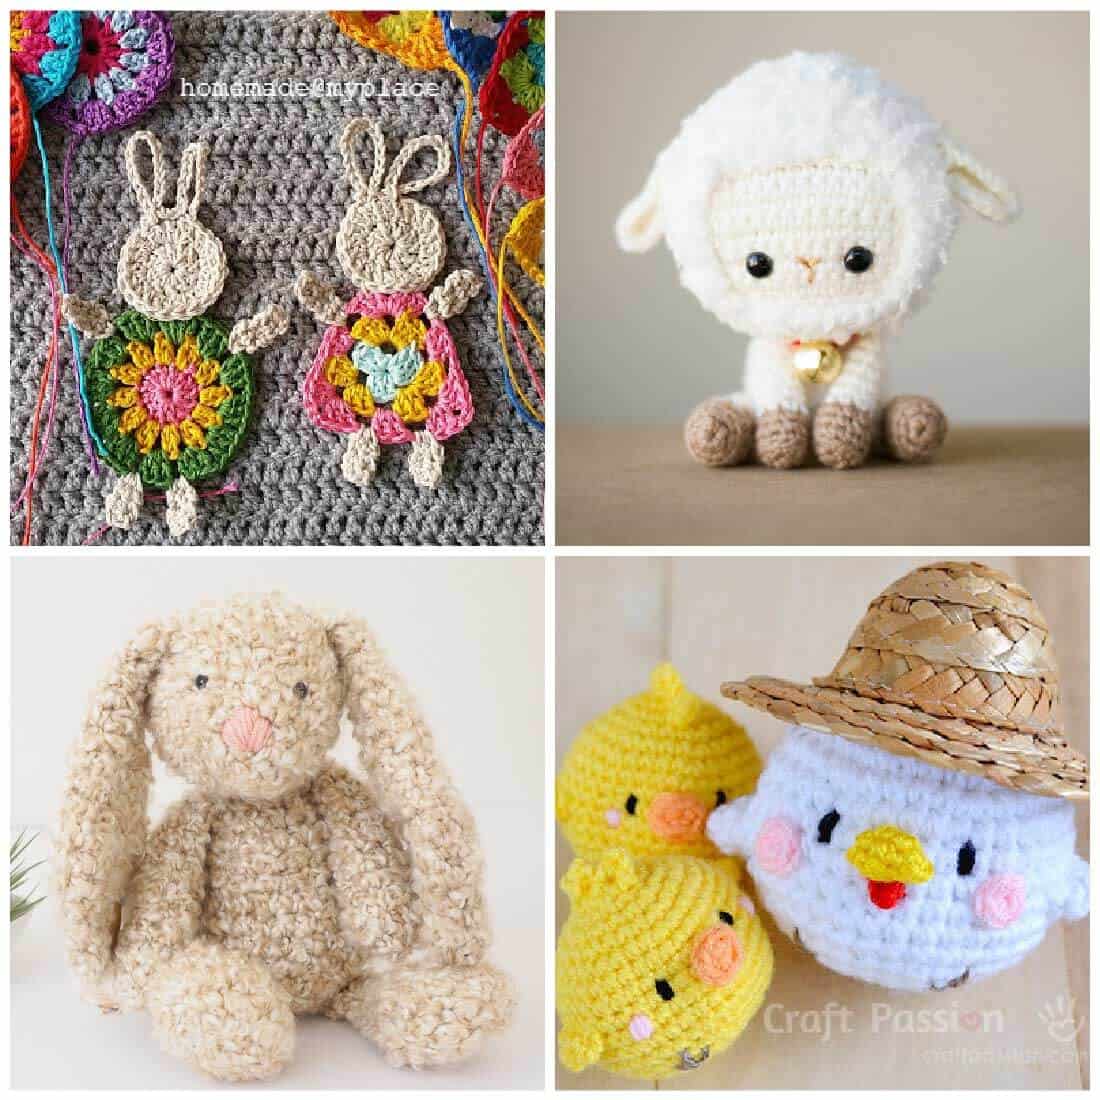 free crochet patterns | crochet patterns for spring | stuffed animal crochet patterns | These adorable crochet patterns are just the thing for Spring. From stuffing Easter baskets to making your home look ready for spring, there's something here that will be perfect for you this season!